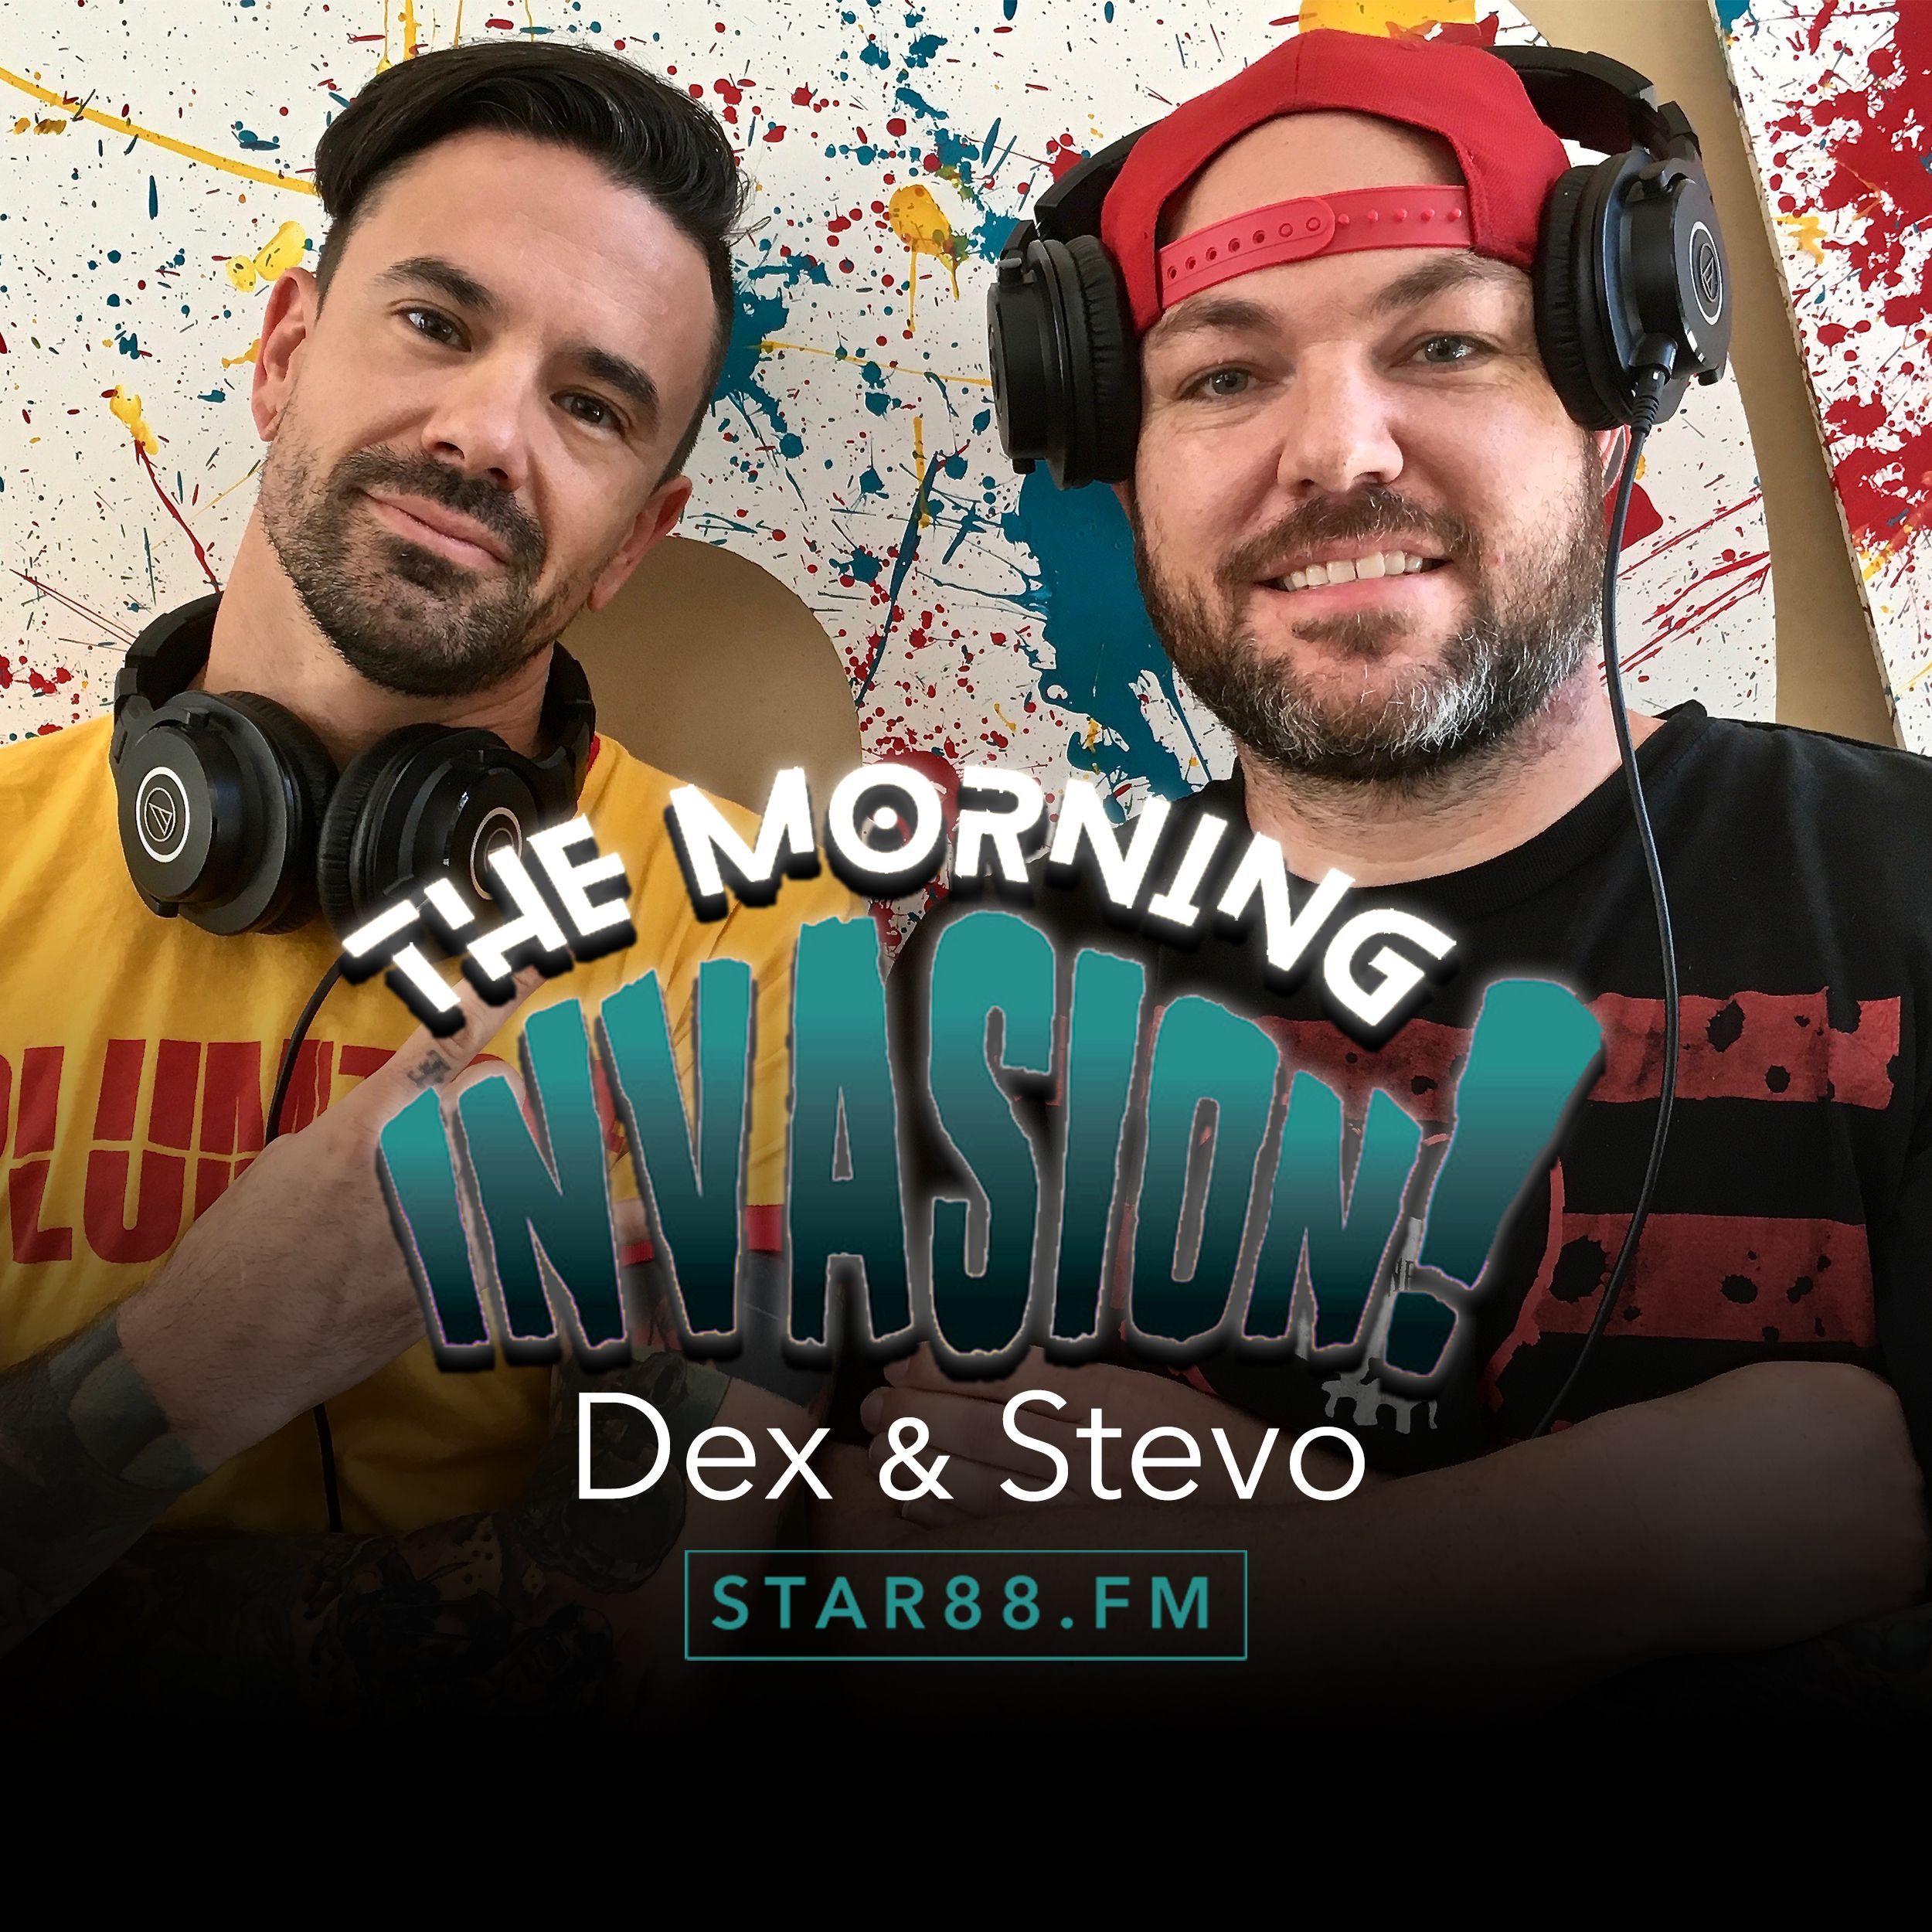 The Morning Invasion - March 6, 2019 - Hour 1 - This Podcast Is The Bees Knees